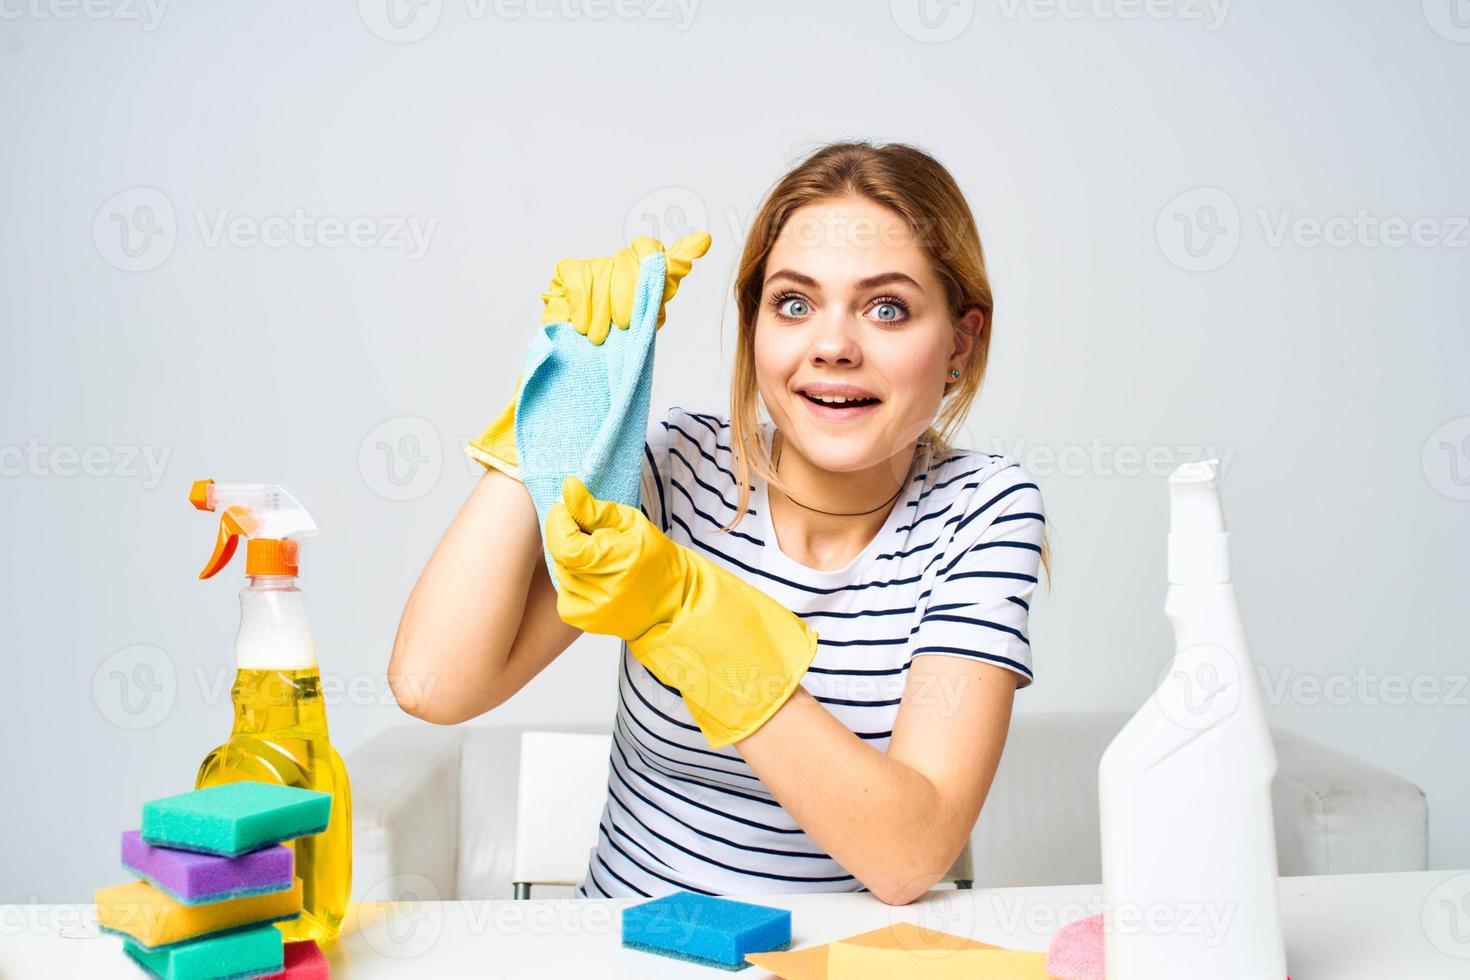 cleaning lady sitting at the table washing supplies work pallets light background photo